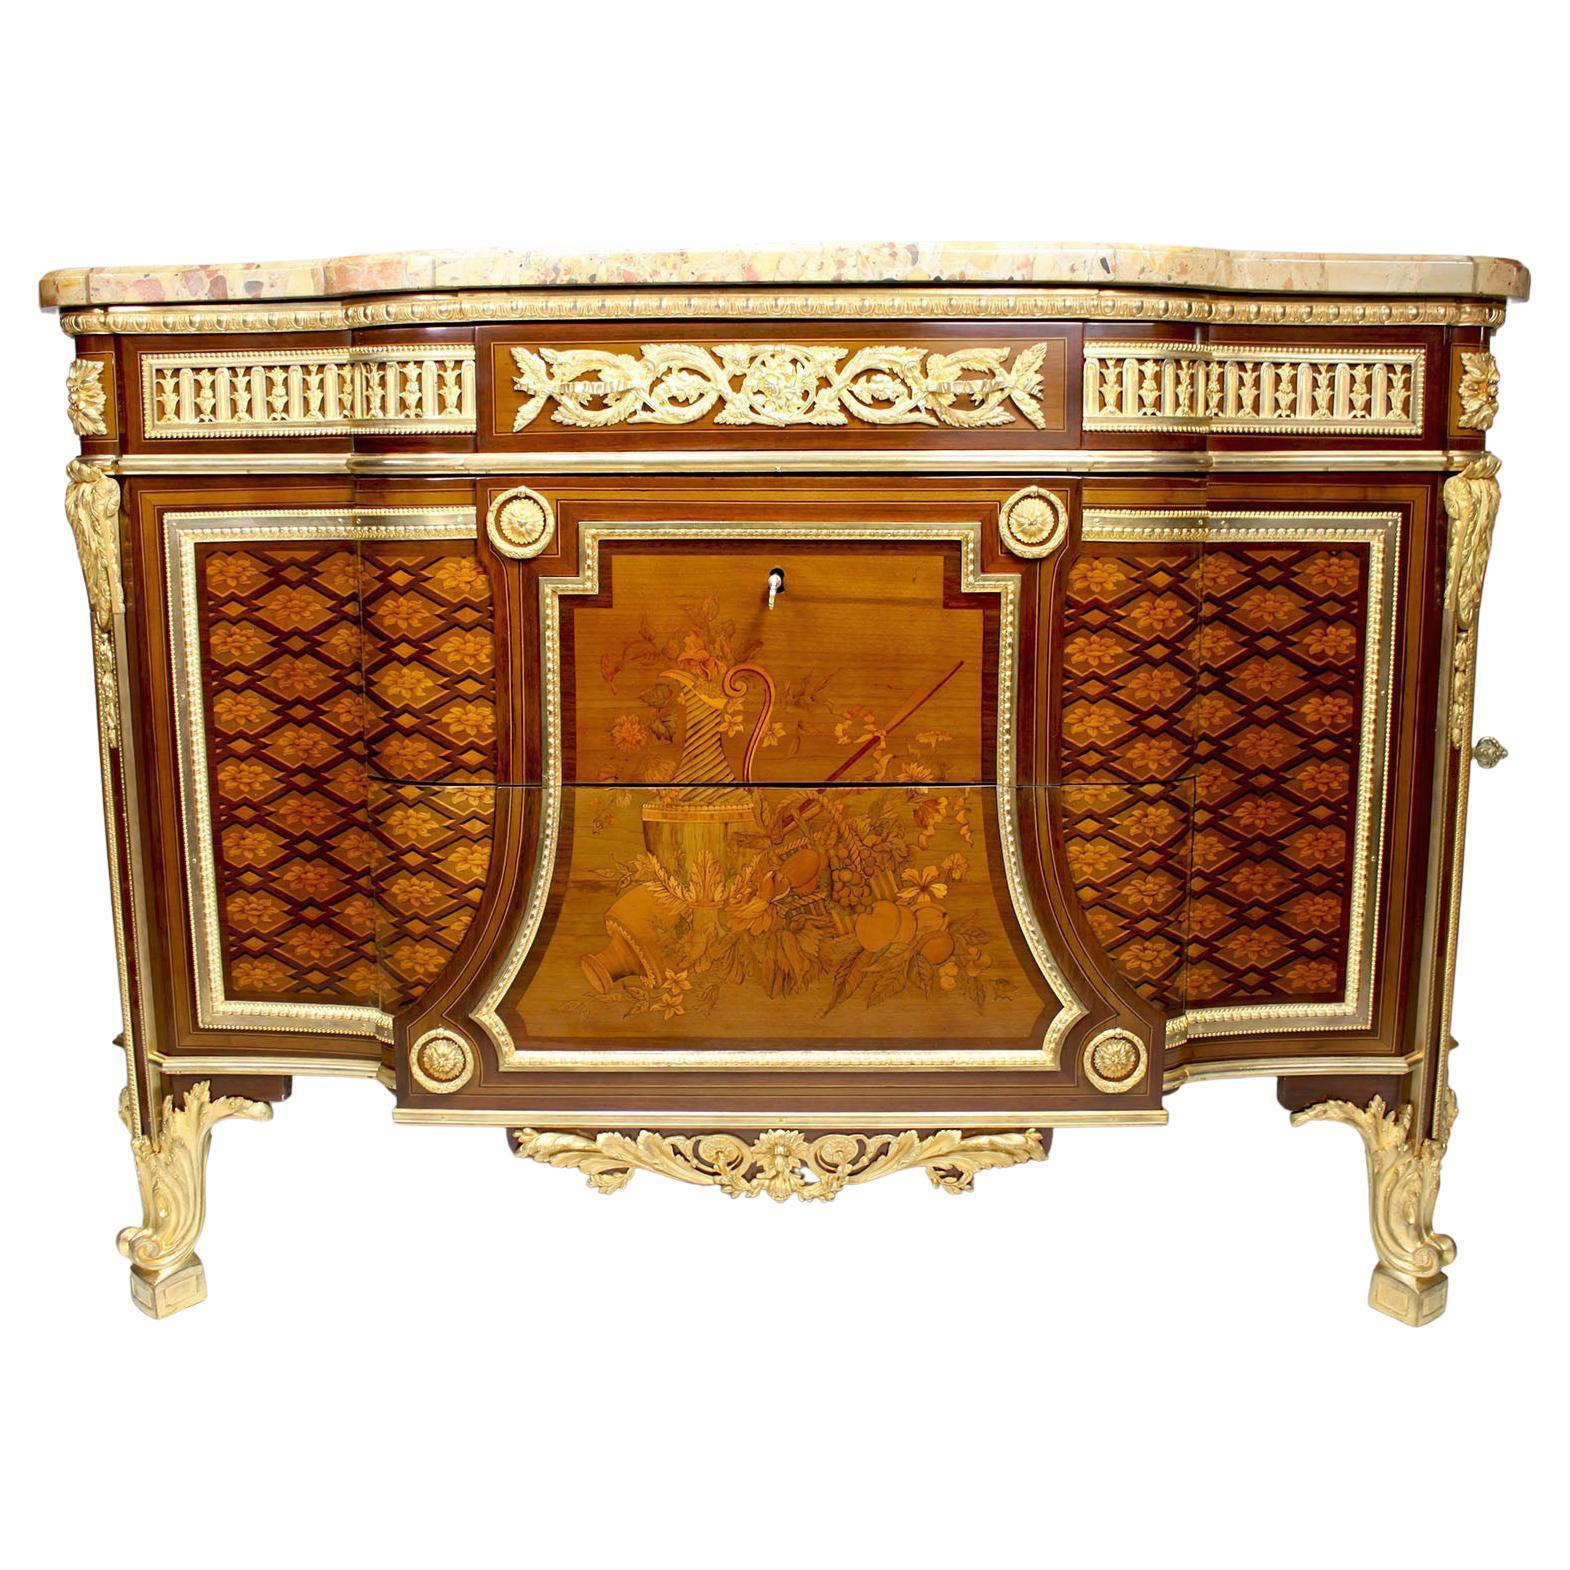 French 19th Century Louis XV-XVI Ormolu Mounted Marquetry Commode Marble Top For Sale